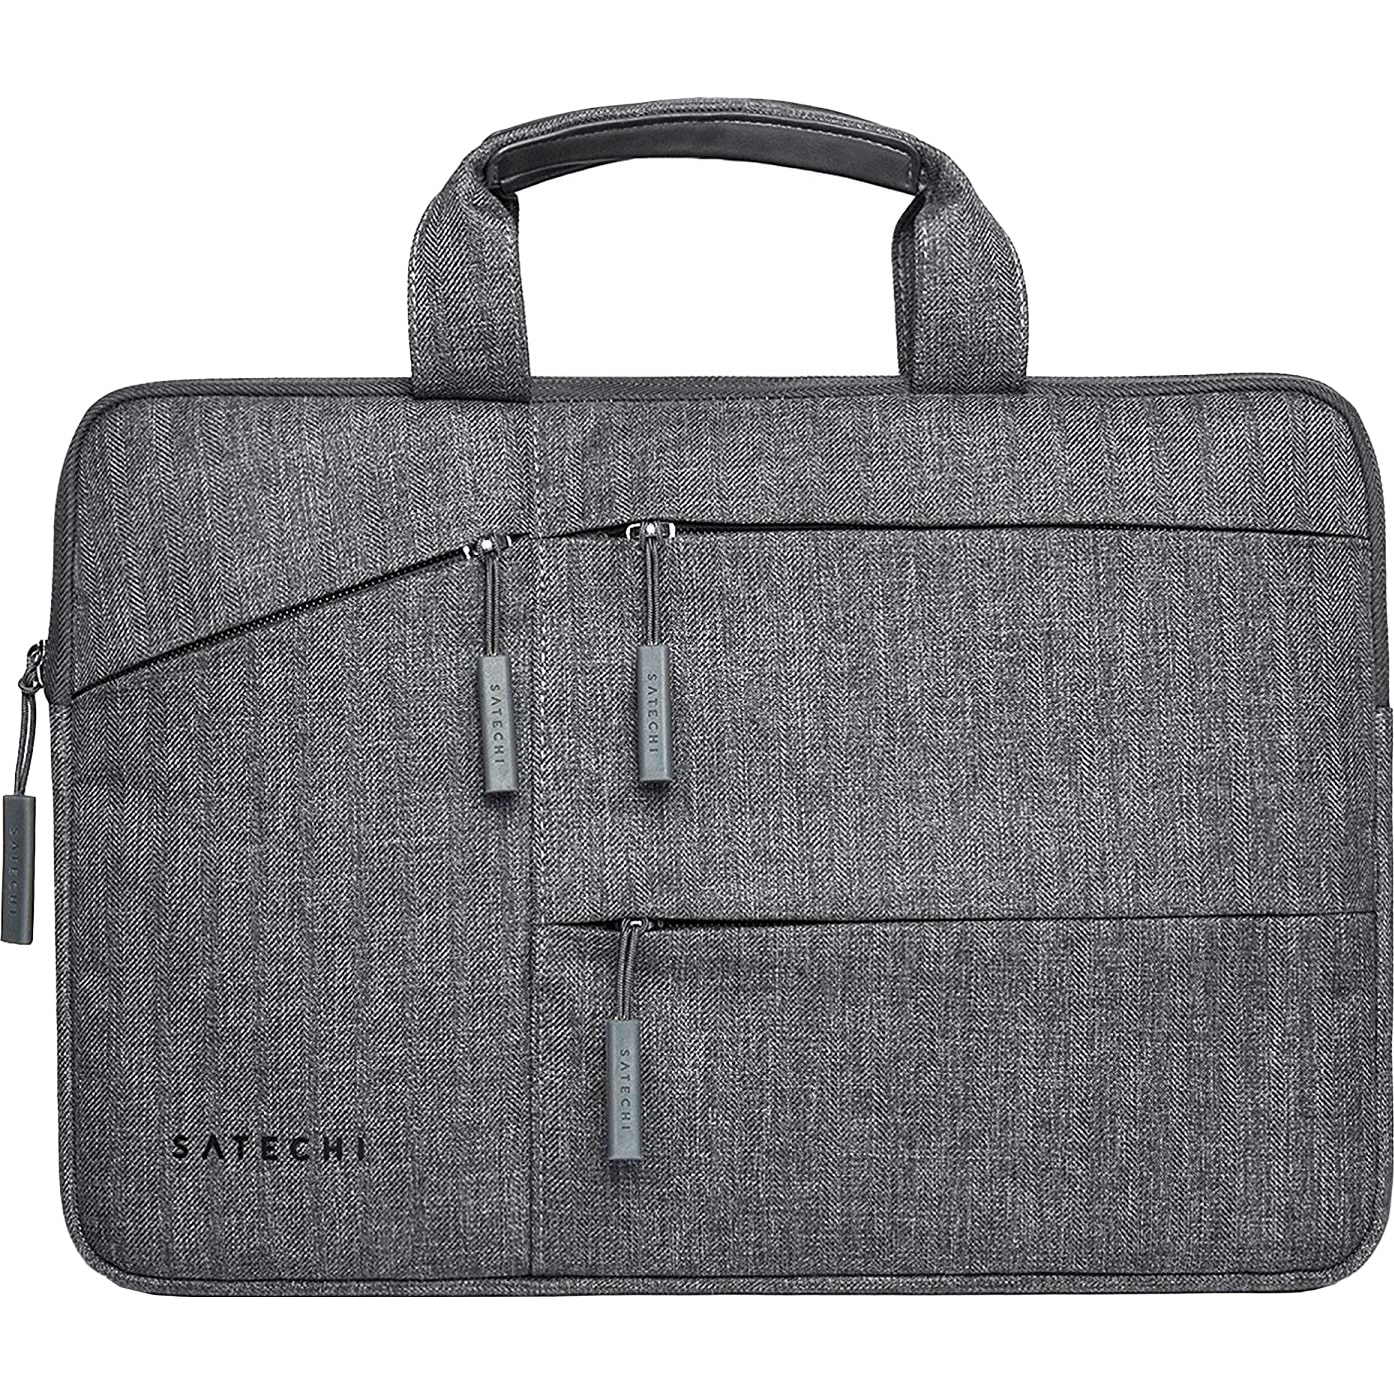 Сумка Satechi Water-Resistant Laptop Carrying Case ST-LTB13 цена и фото